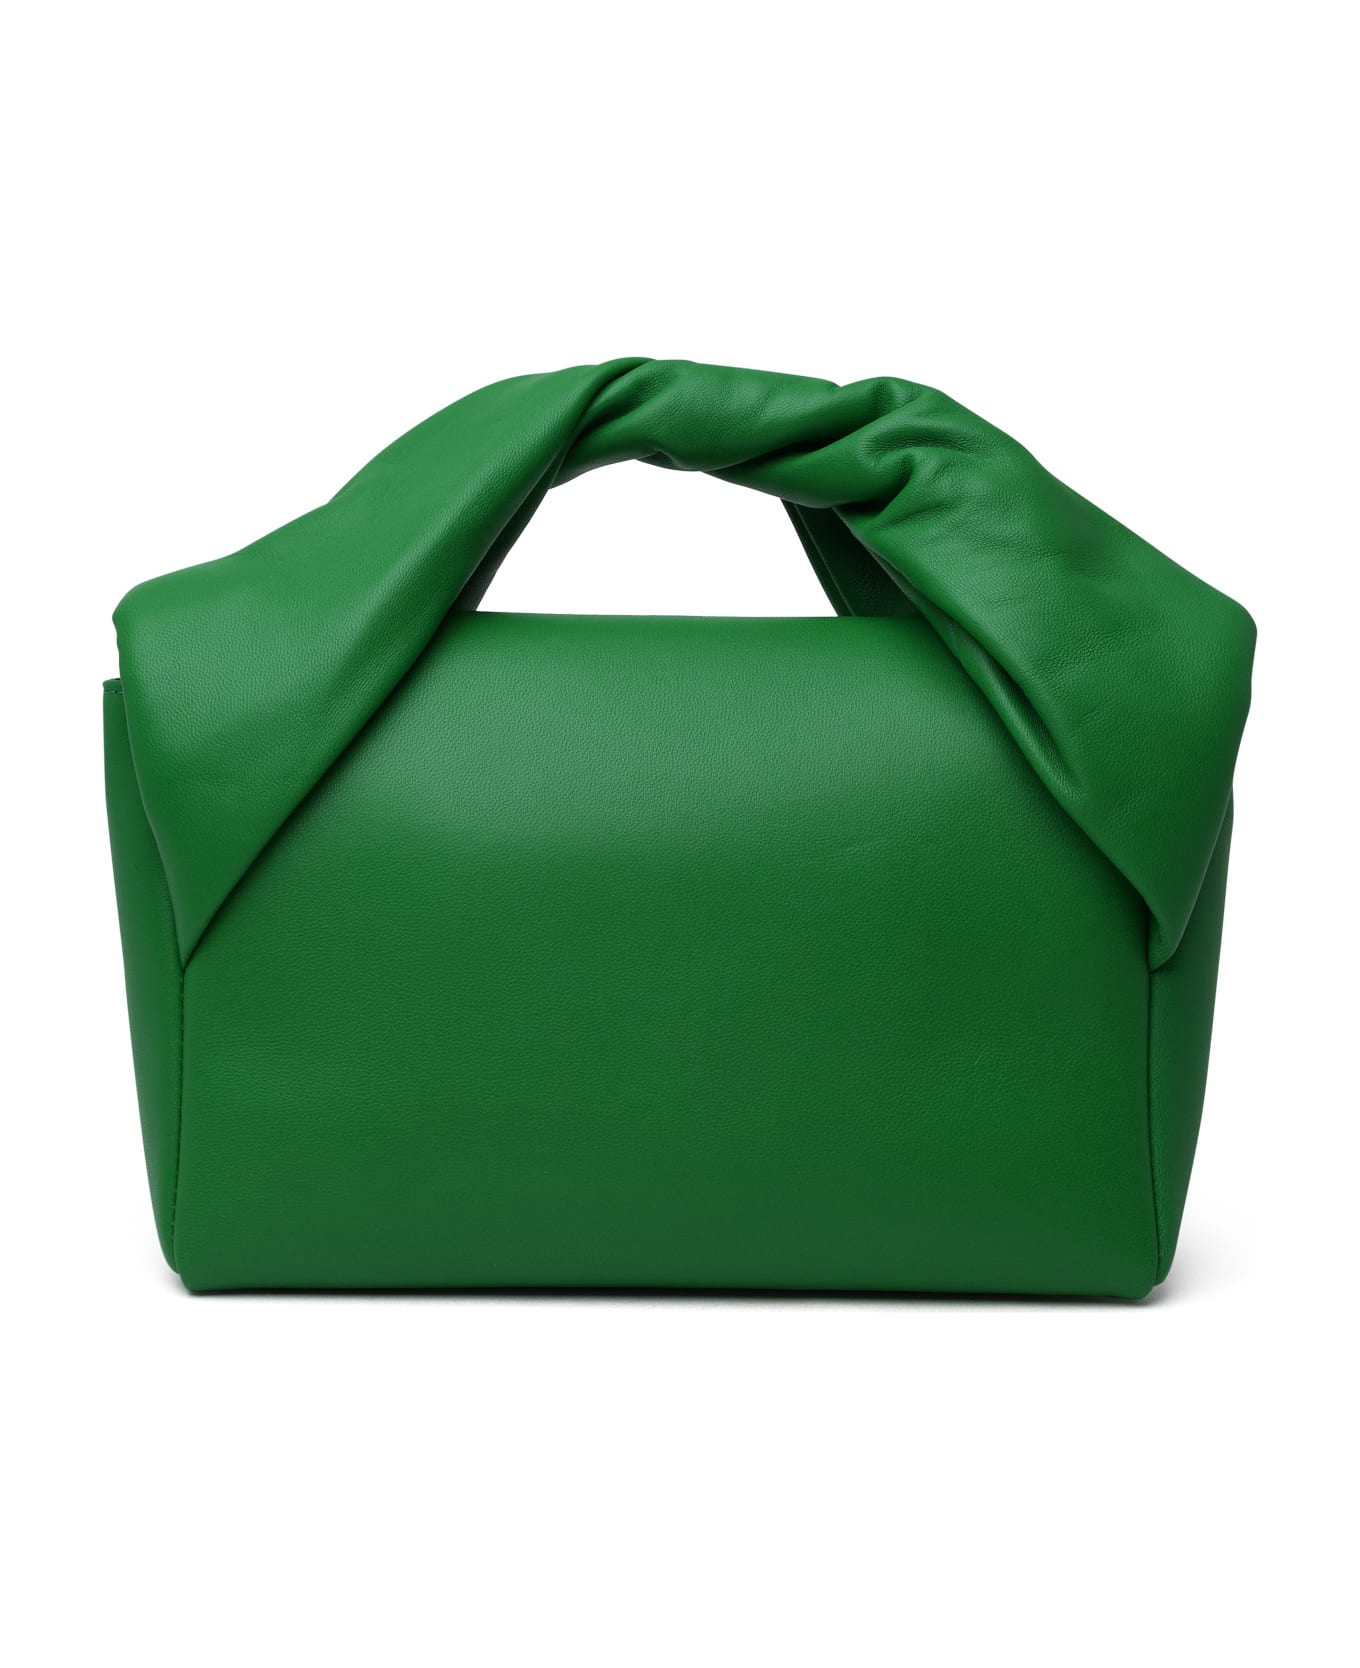 J.W. Anderson Twister Green Leather Bag - BRIGHT GREEN